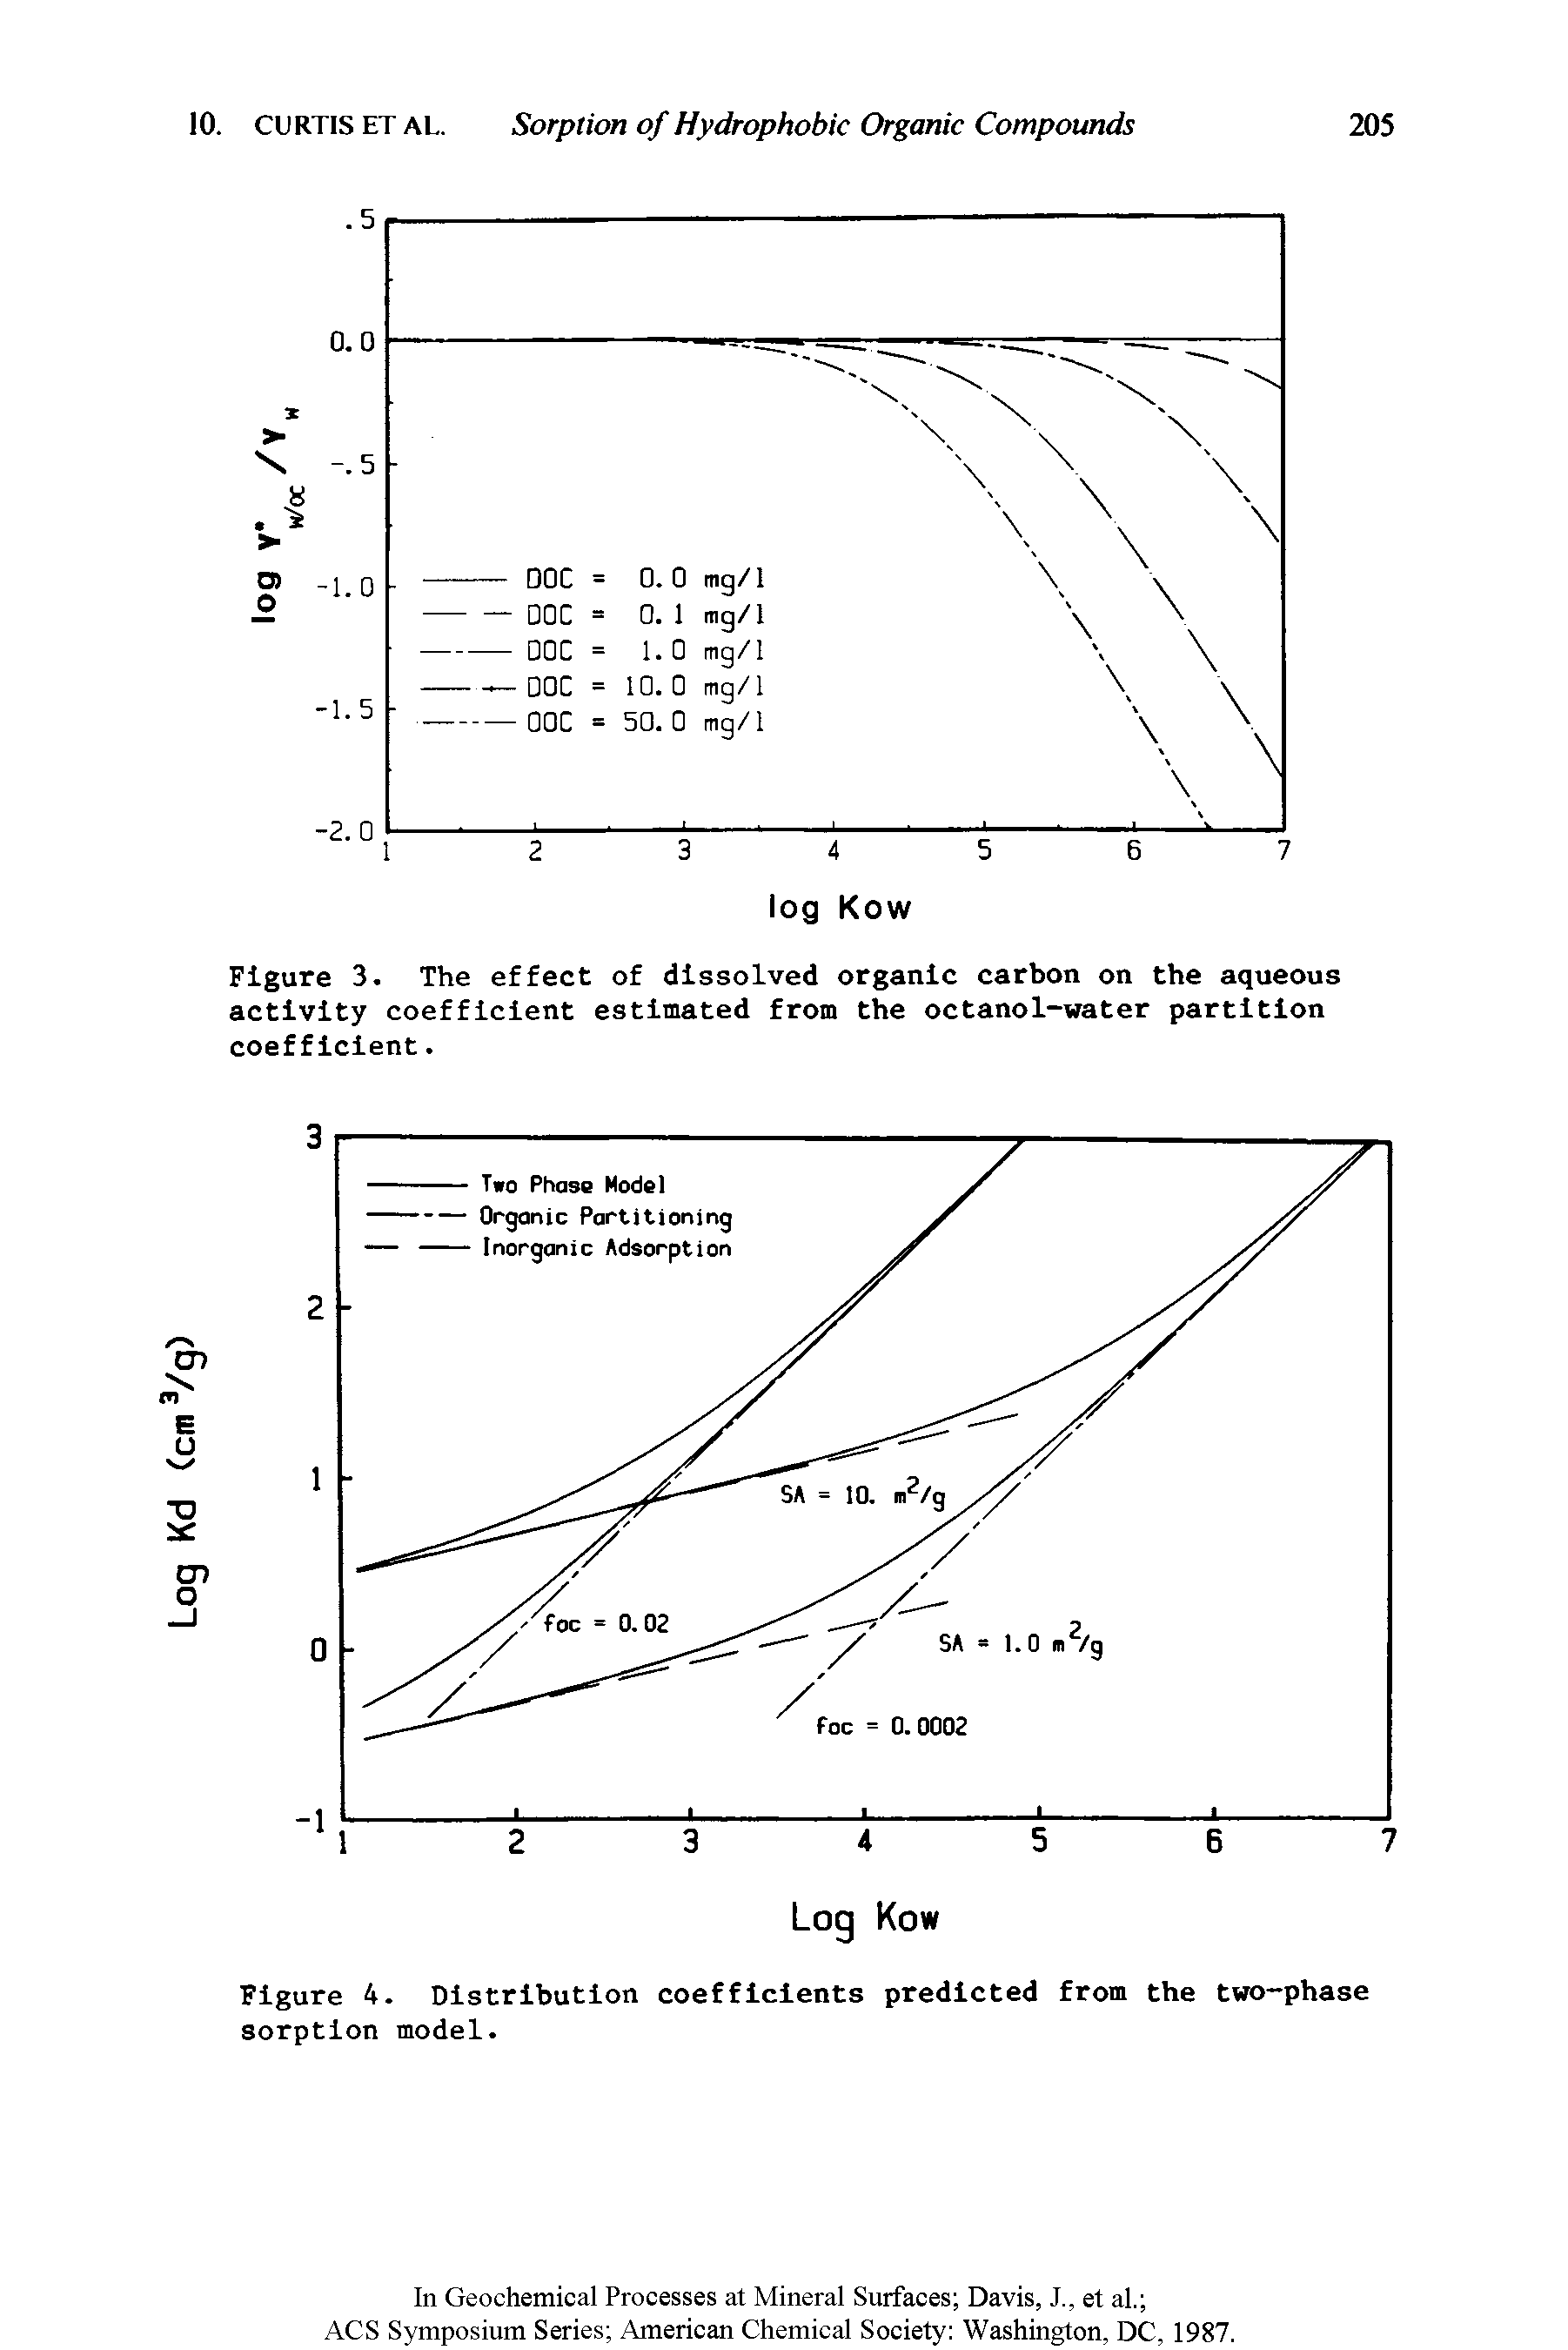 Figure 4. Distribution coefficients predicted from the two-phase sorption model.